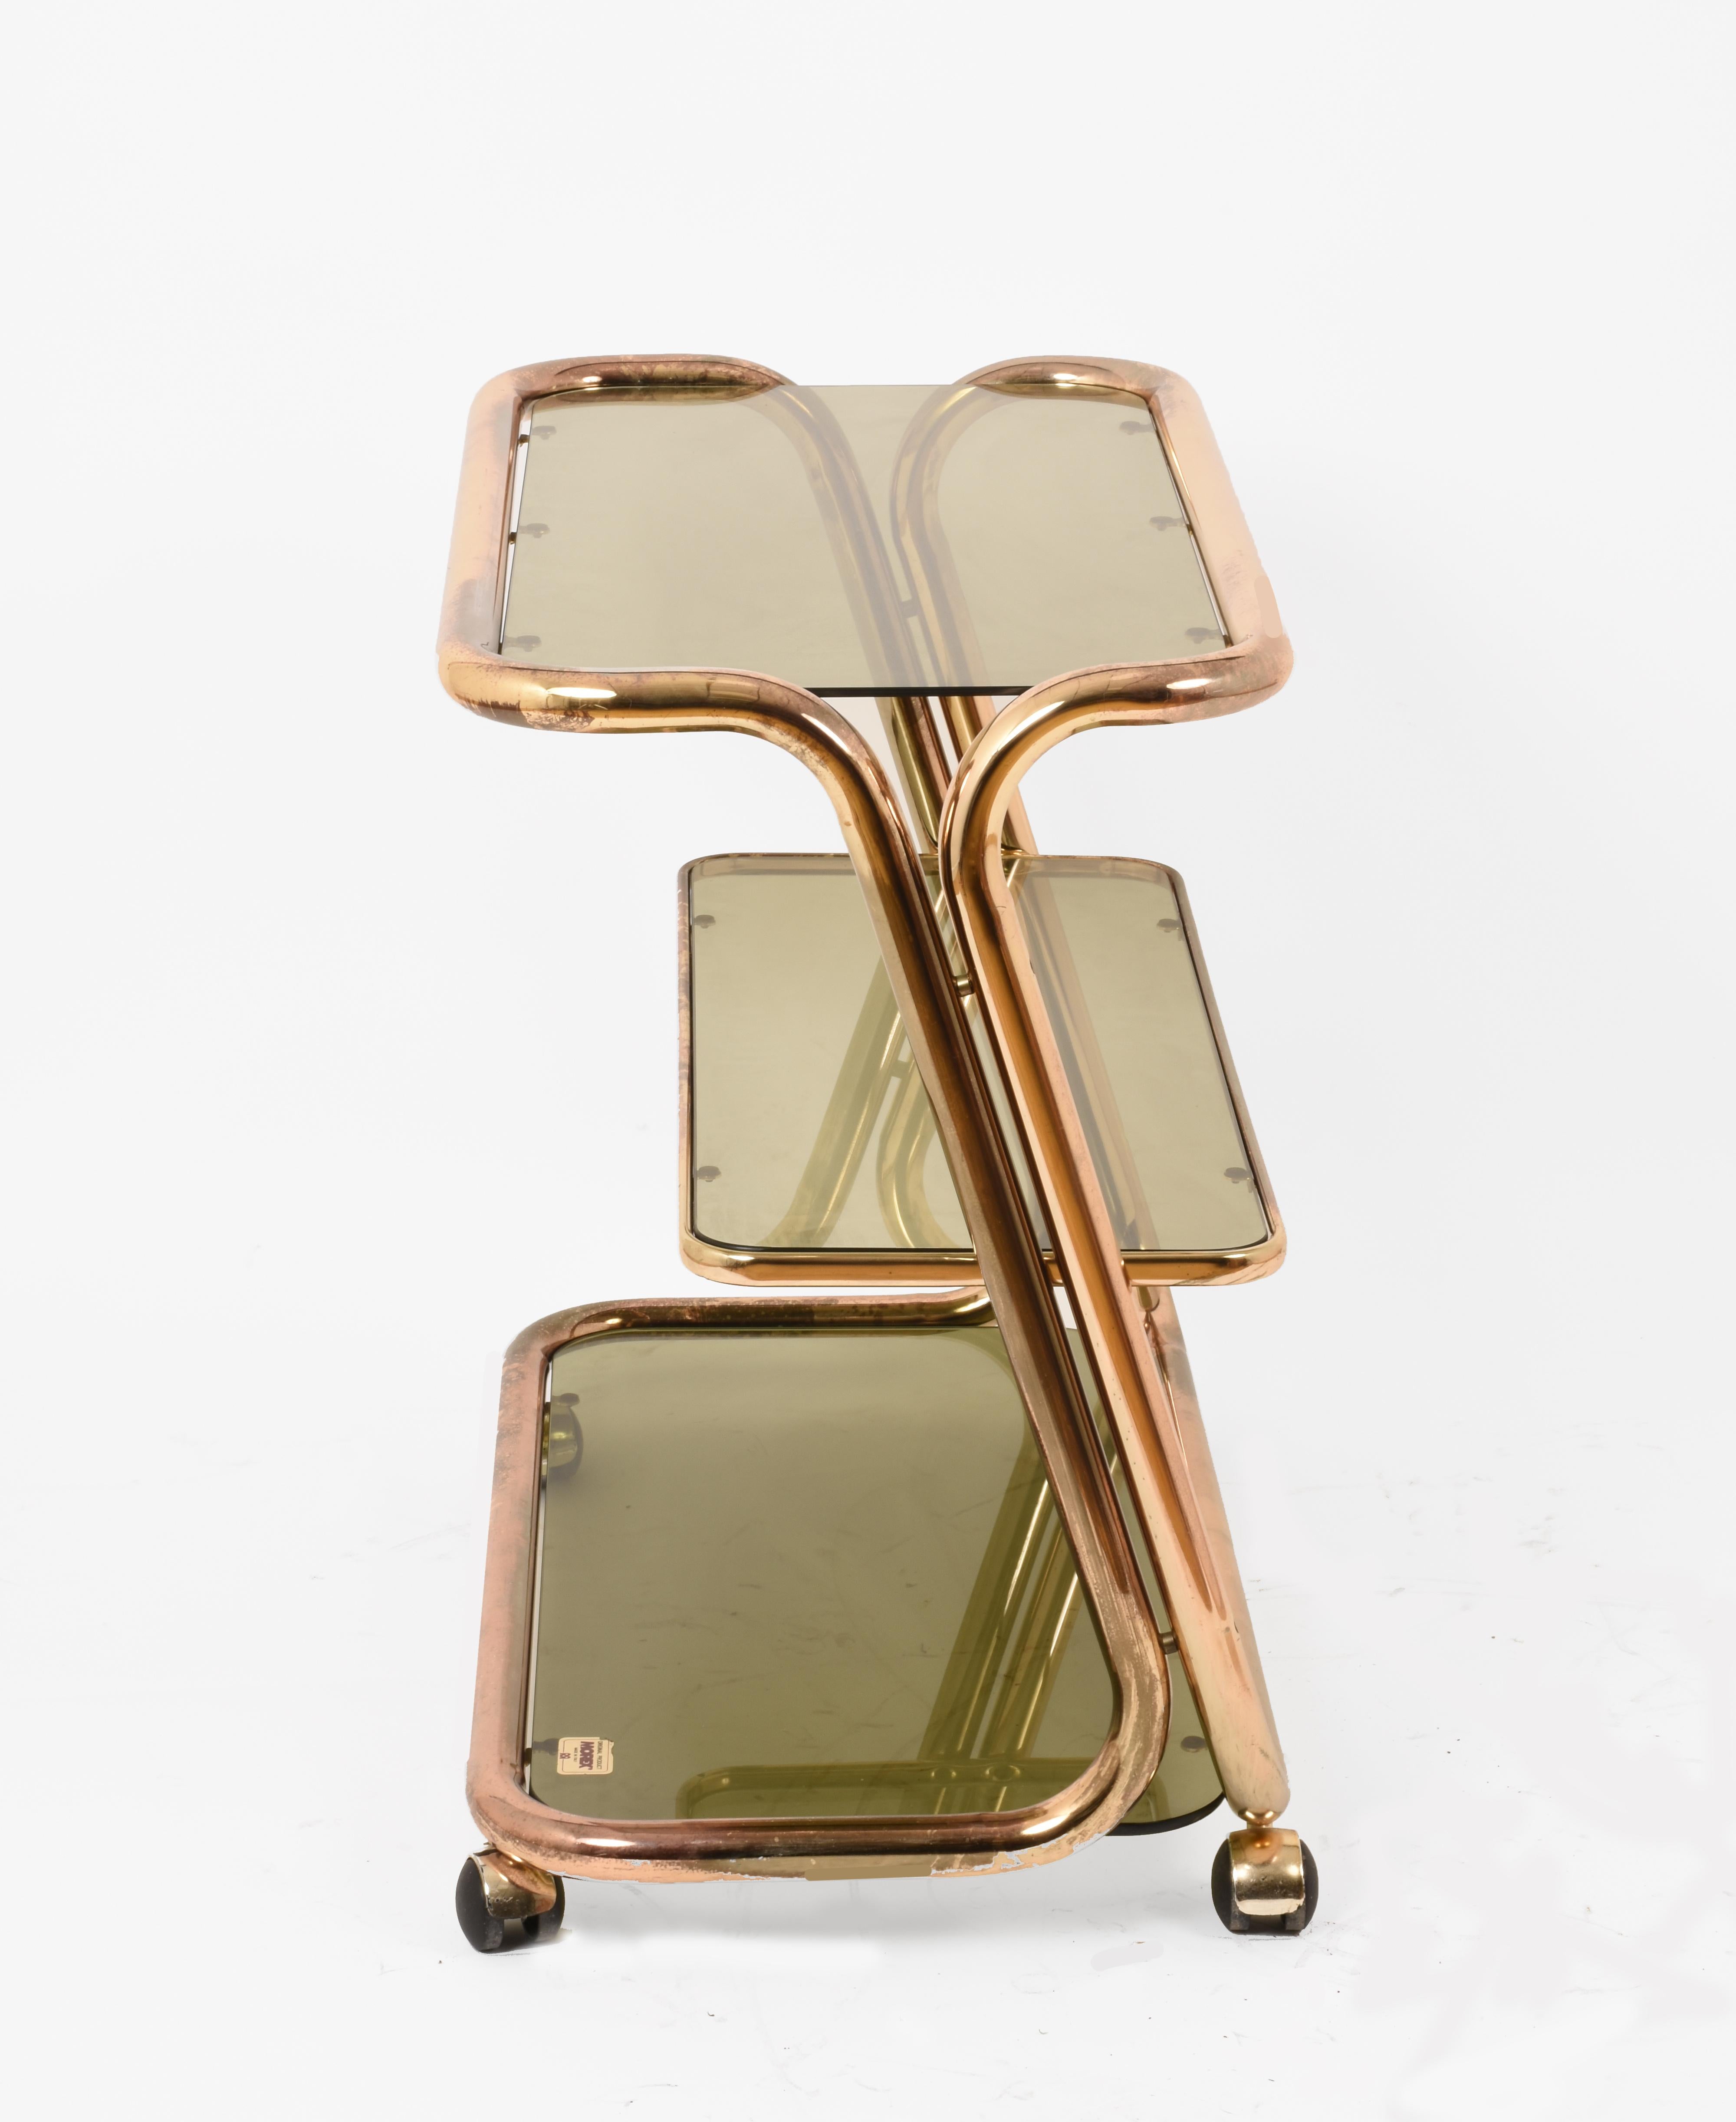 Morex Midcentury Three Levels Brass and Smoked Glass Italian Bar Cart, 1970s For Sale 1